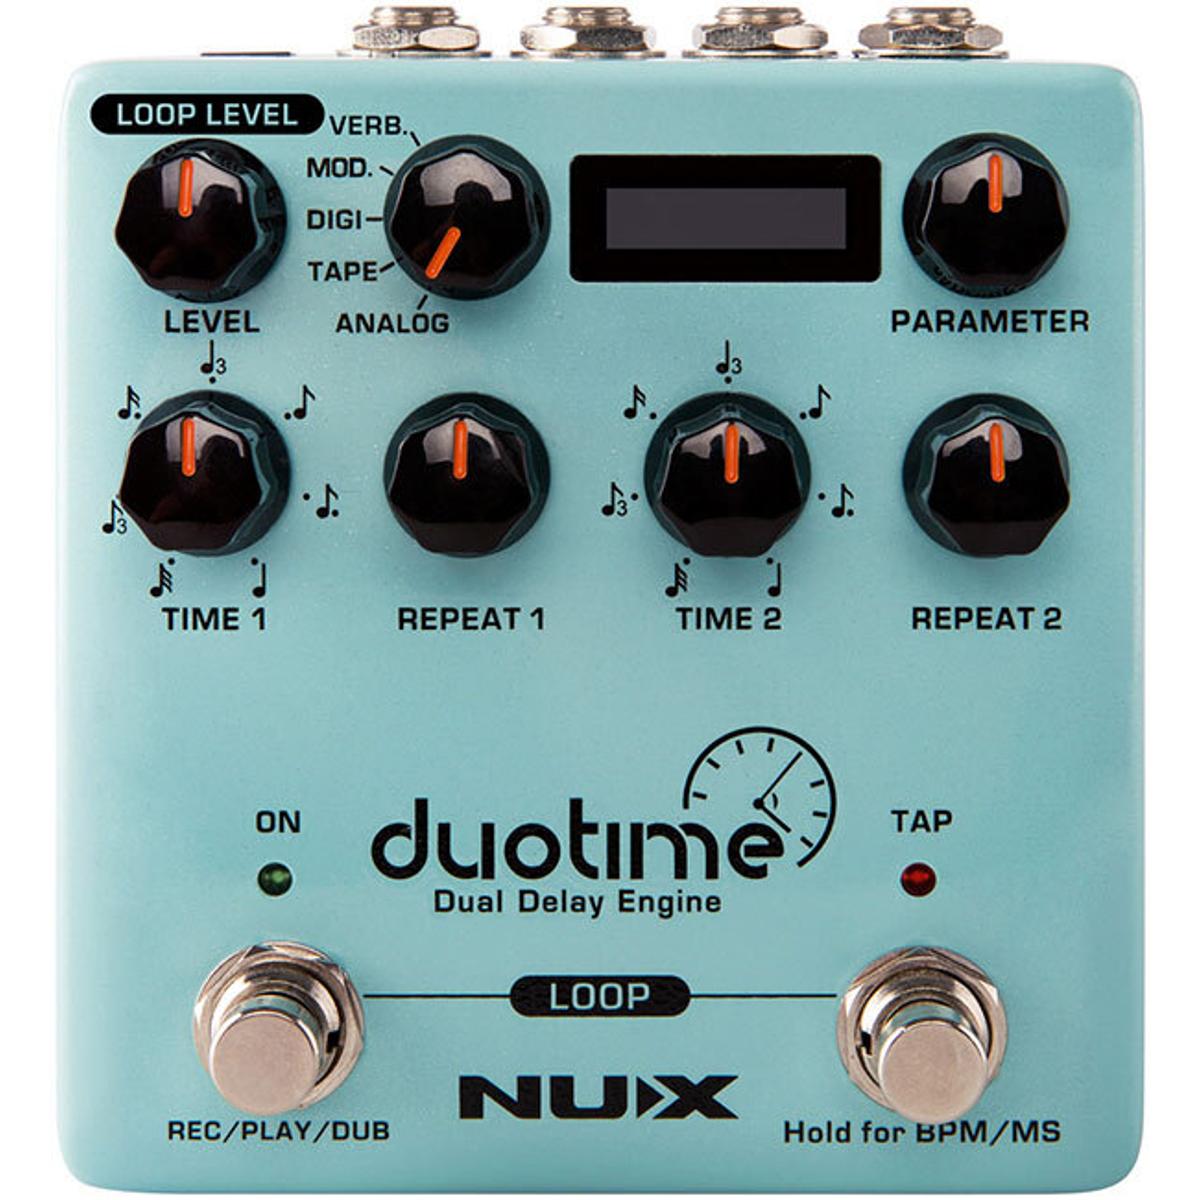 NU-X NXNDD6 Verdugo Series Duotime Dual Delay Engine Effects Pedal